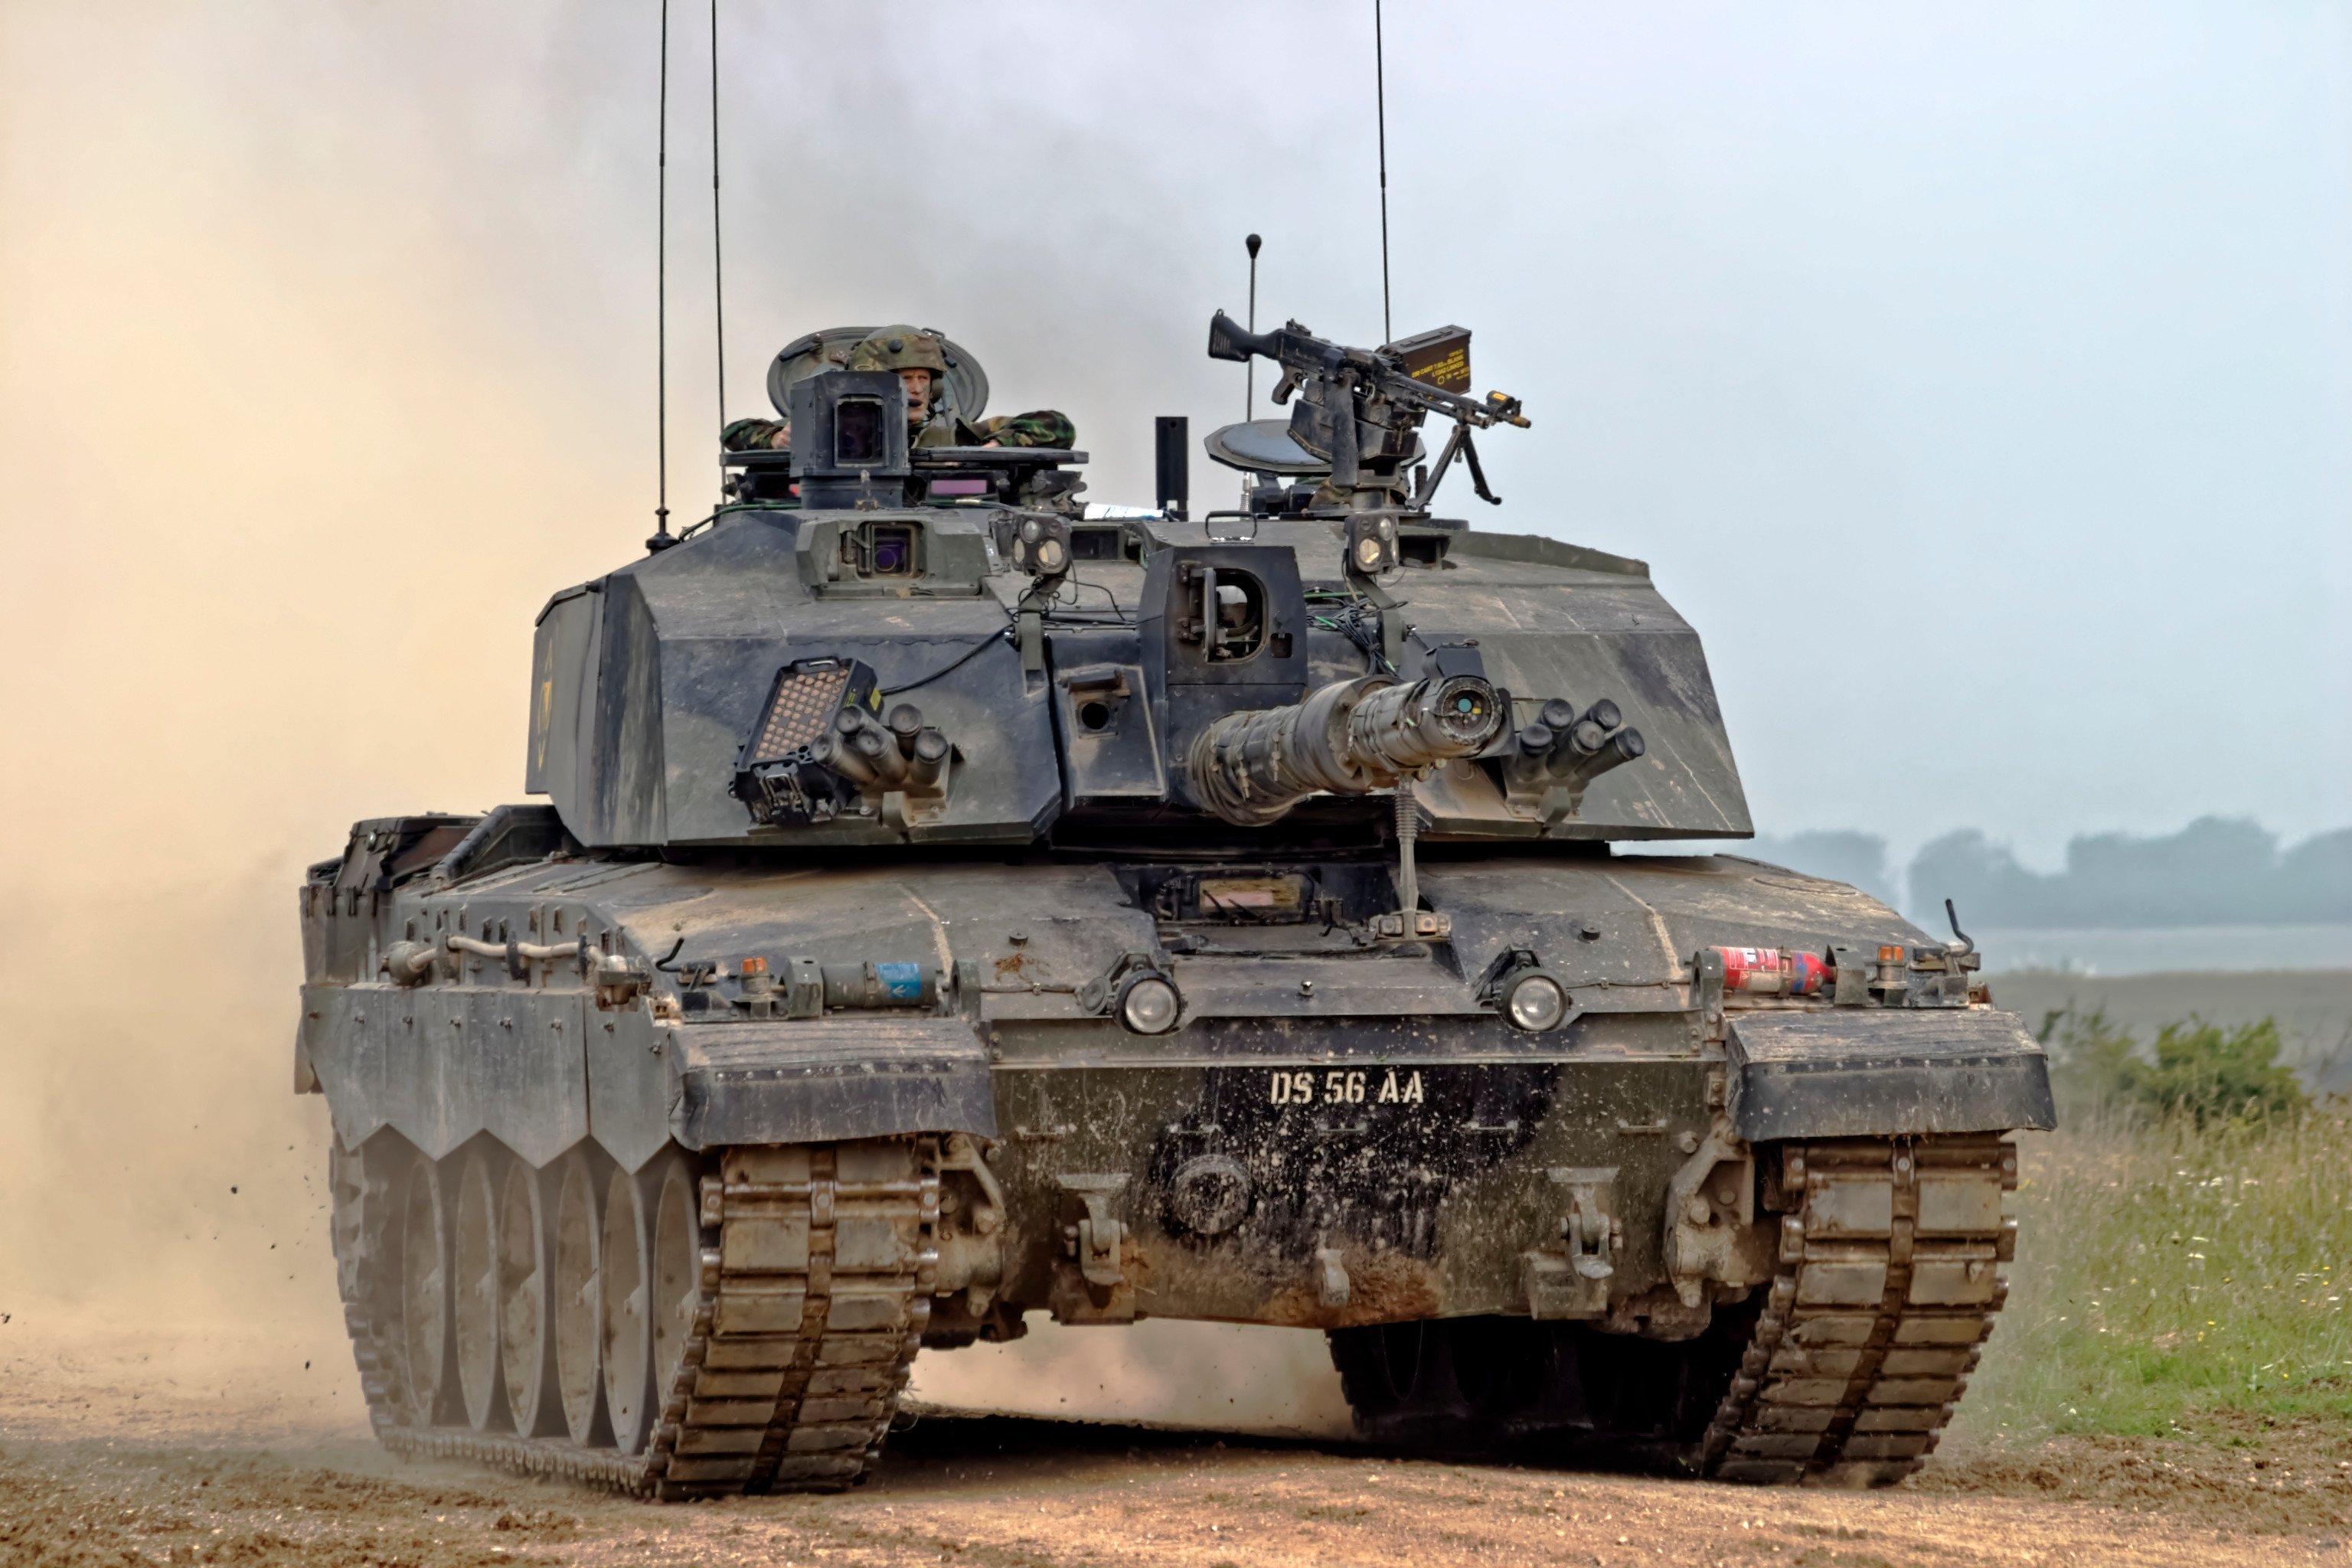 Challenger 2s are considered one of the world’s most effective and battle-tested tanks. File photo: Shutterstock